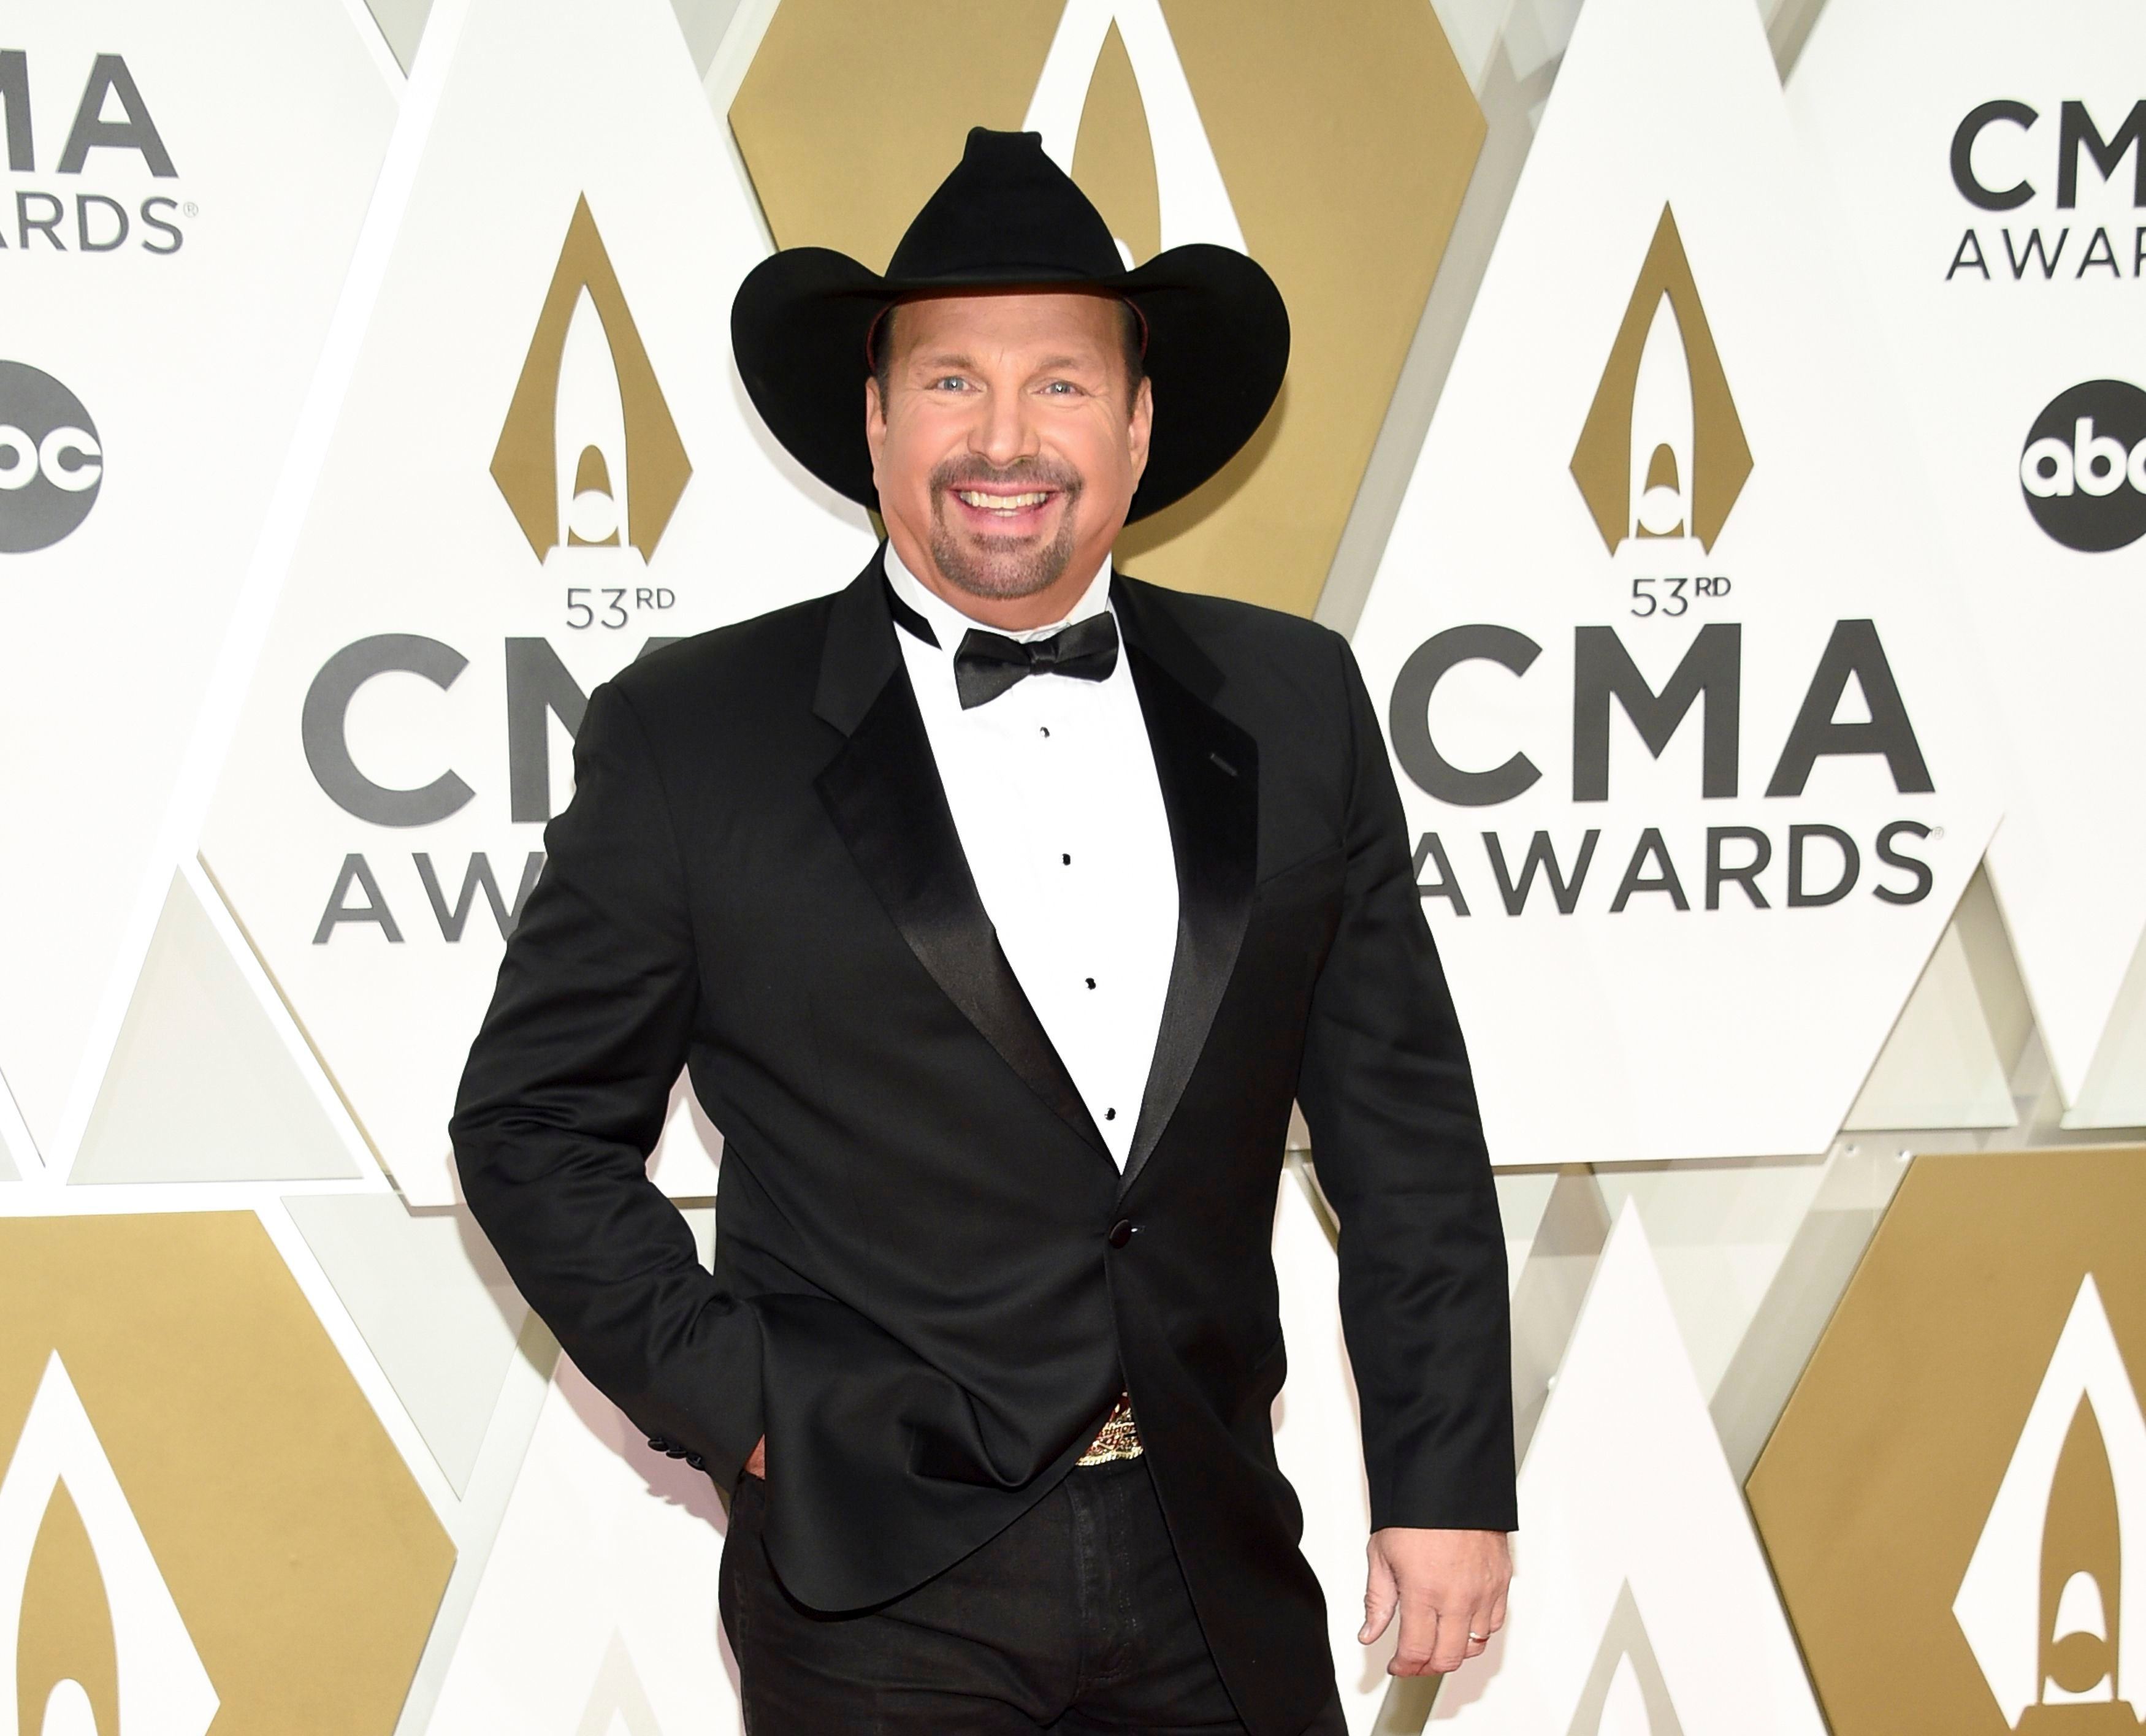 Garth Brooks' Net Worth How Much Money Does the Country Star Have?